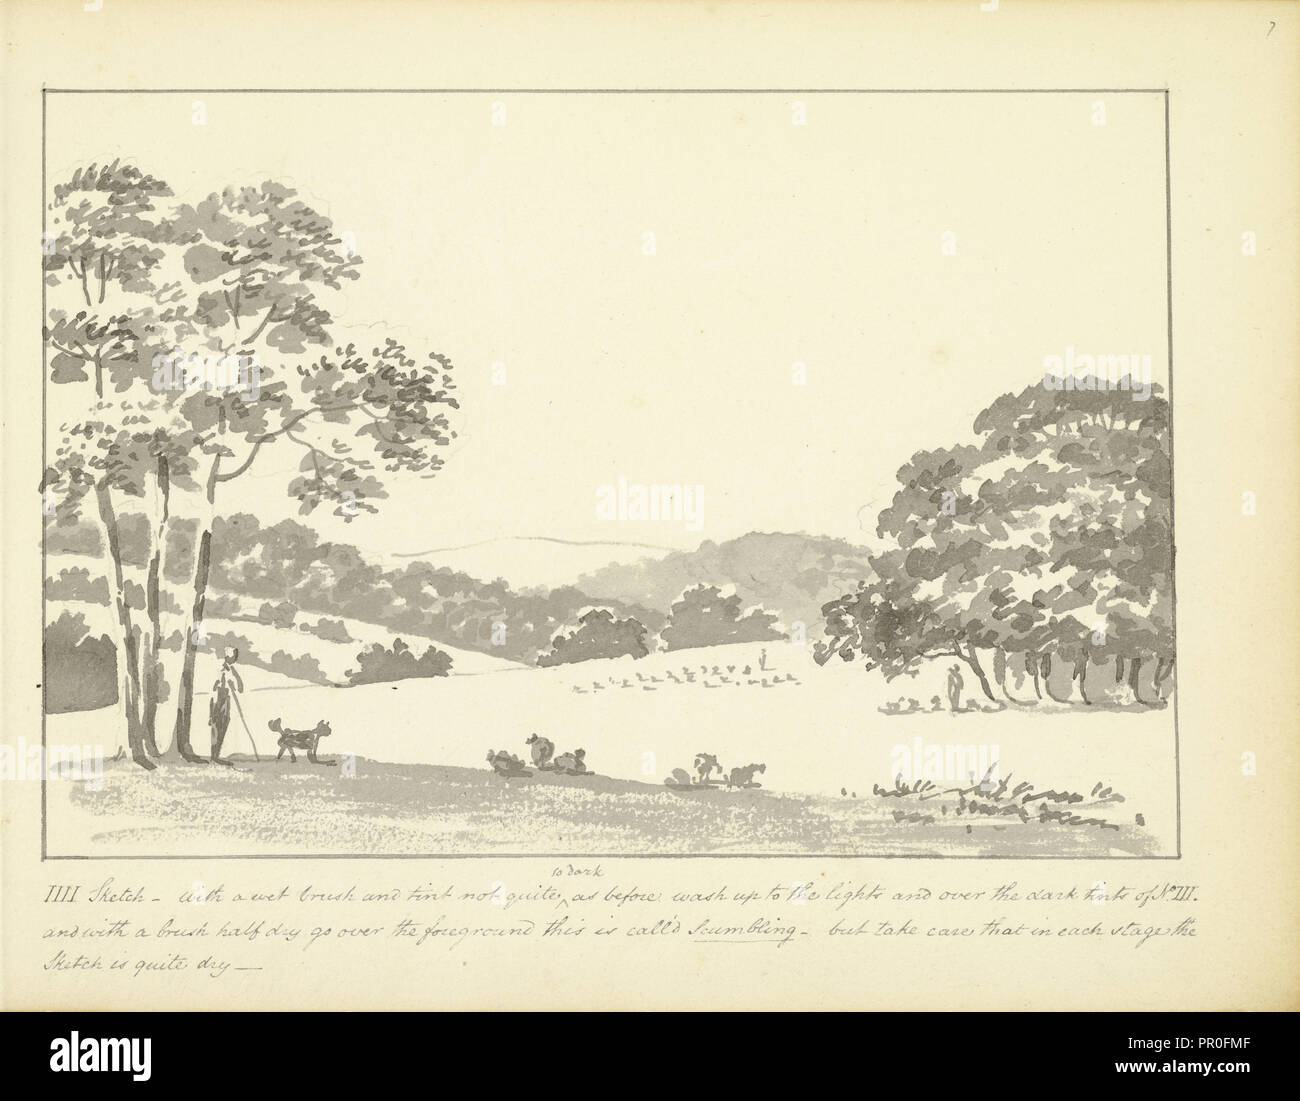 IIII Sketch - with a wet brush and tint, A few hints concerning landscape sketches, ca. 1810, Humphry Repton architecture Stock Photo